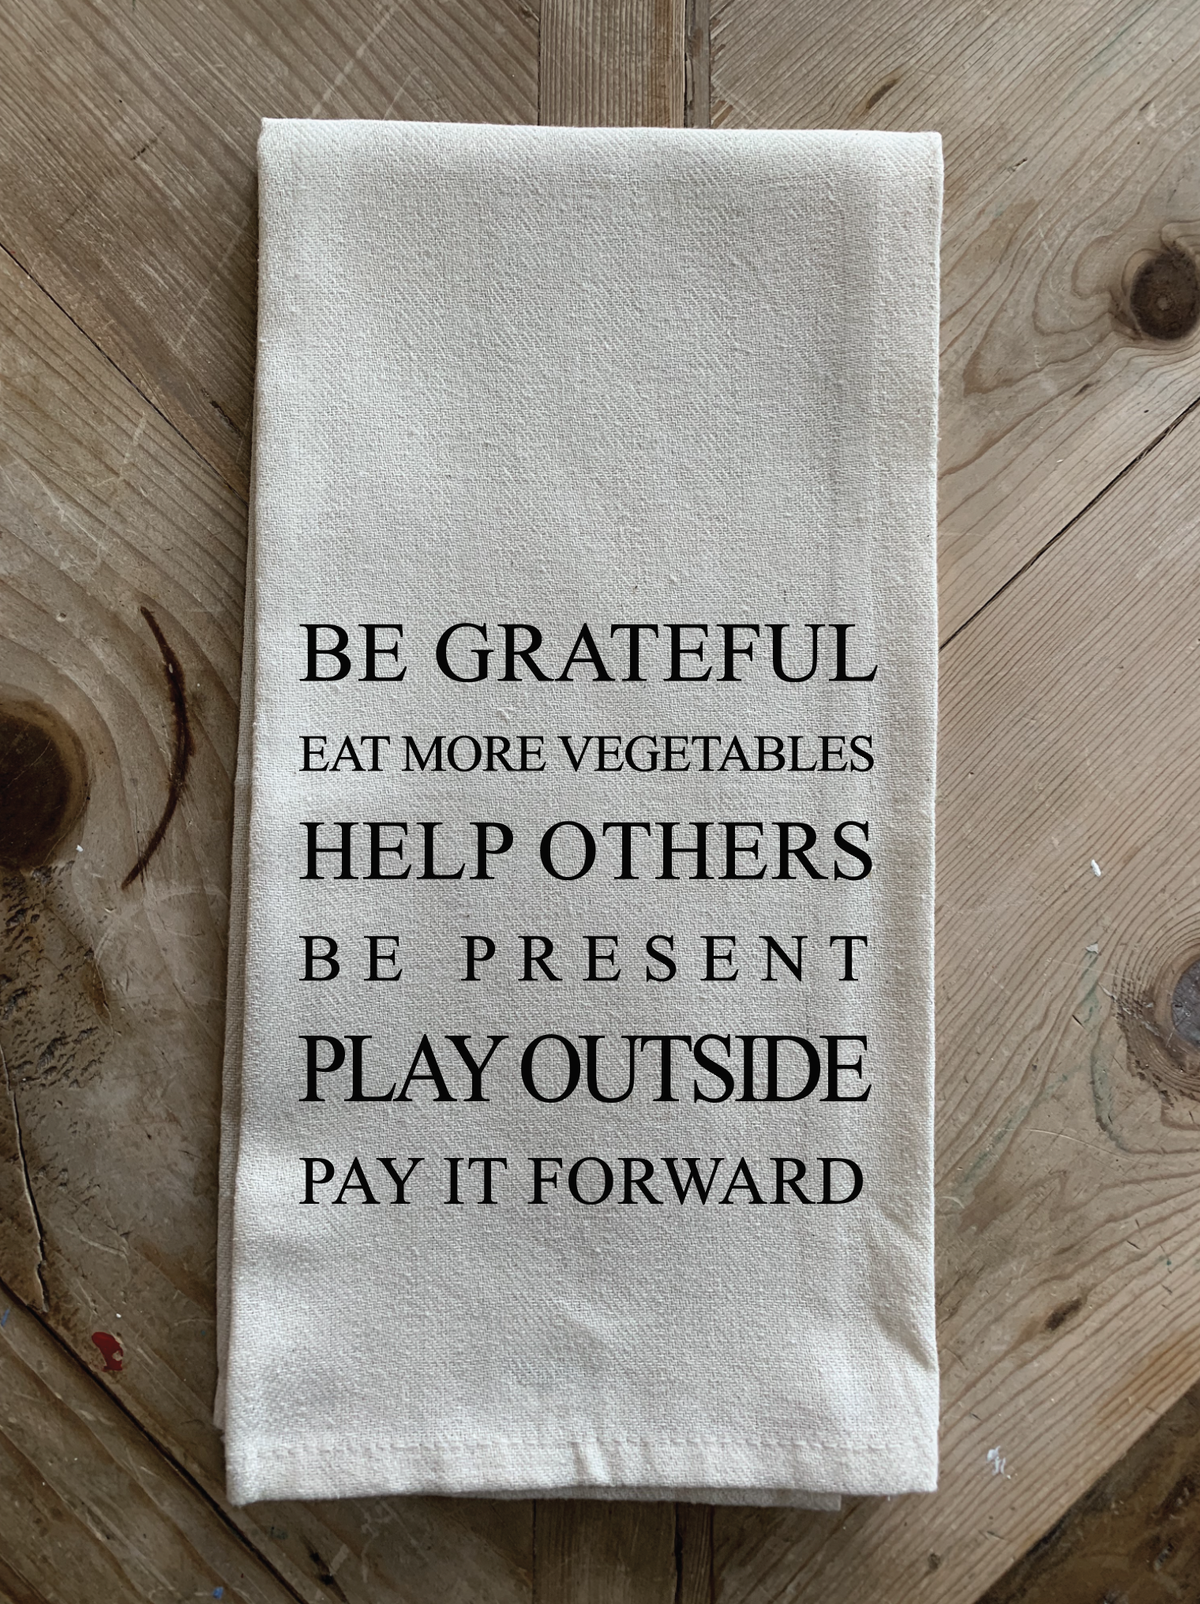 Be grateful, eat more vegetables, help others, be present, play outside, pay it forward.